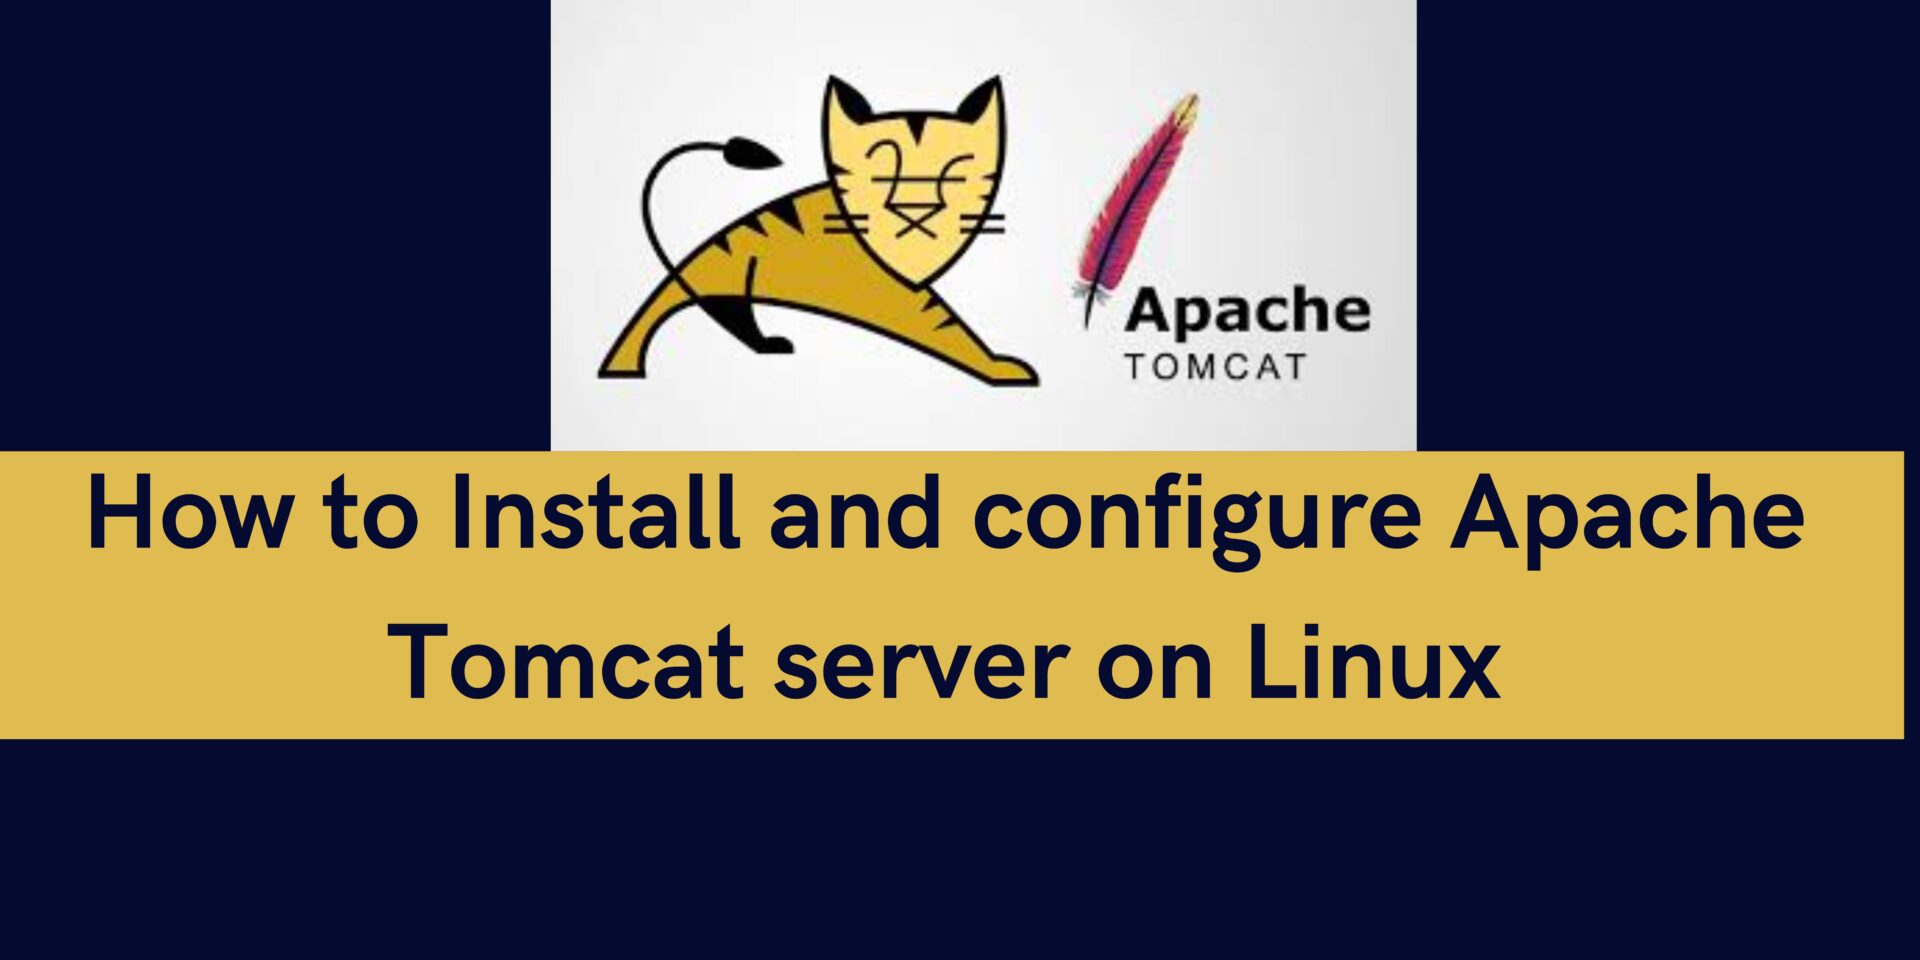 You are currently viewing How to Install and configure Apache Tomcat server on Linux